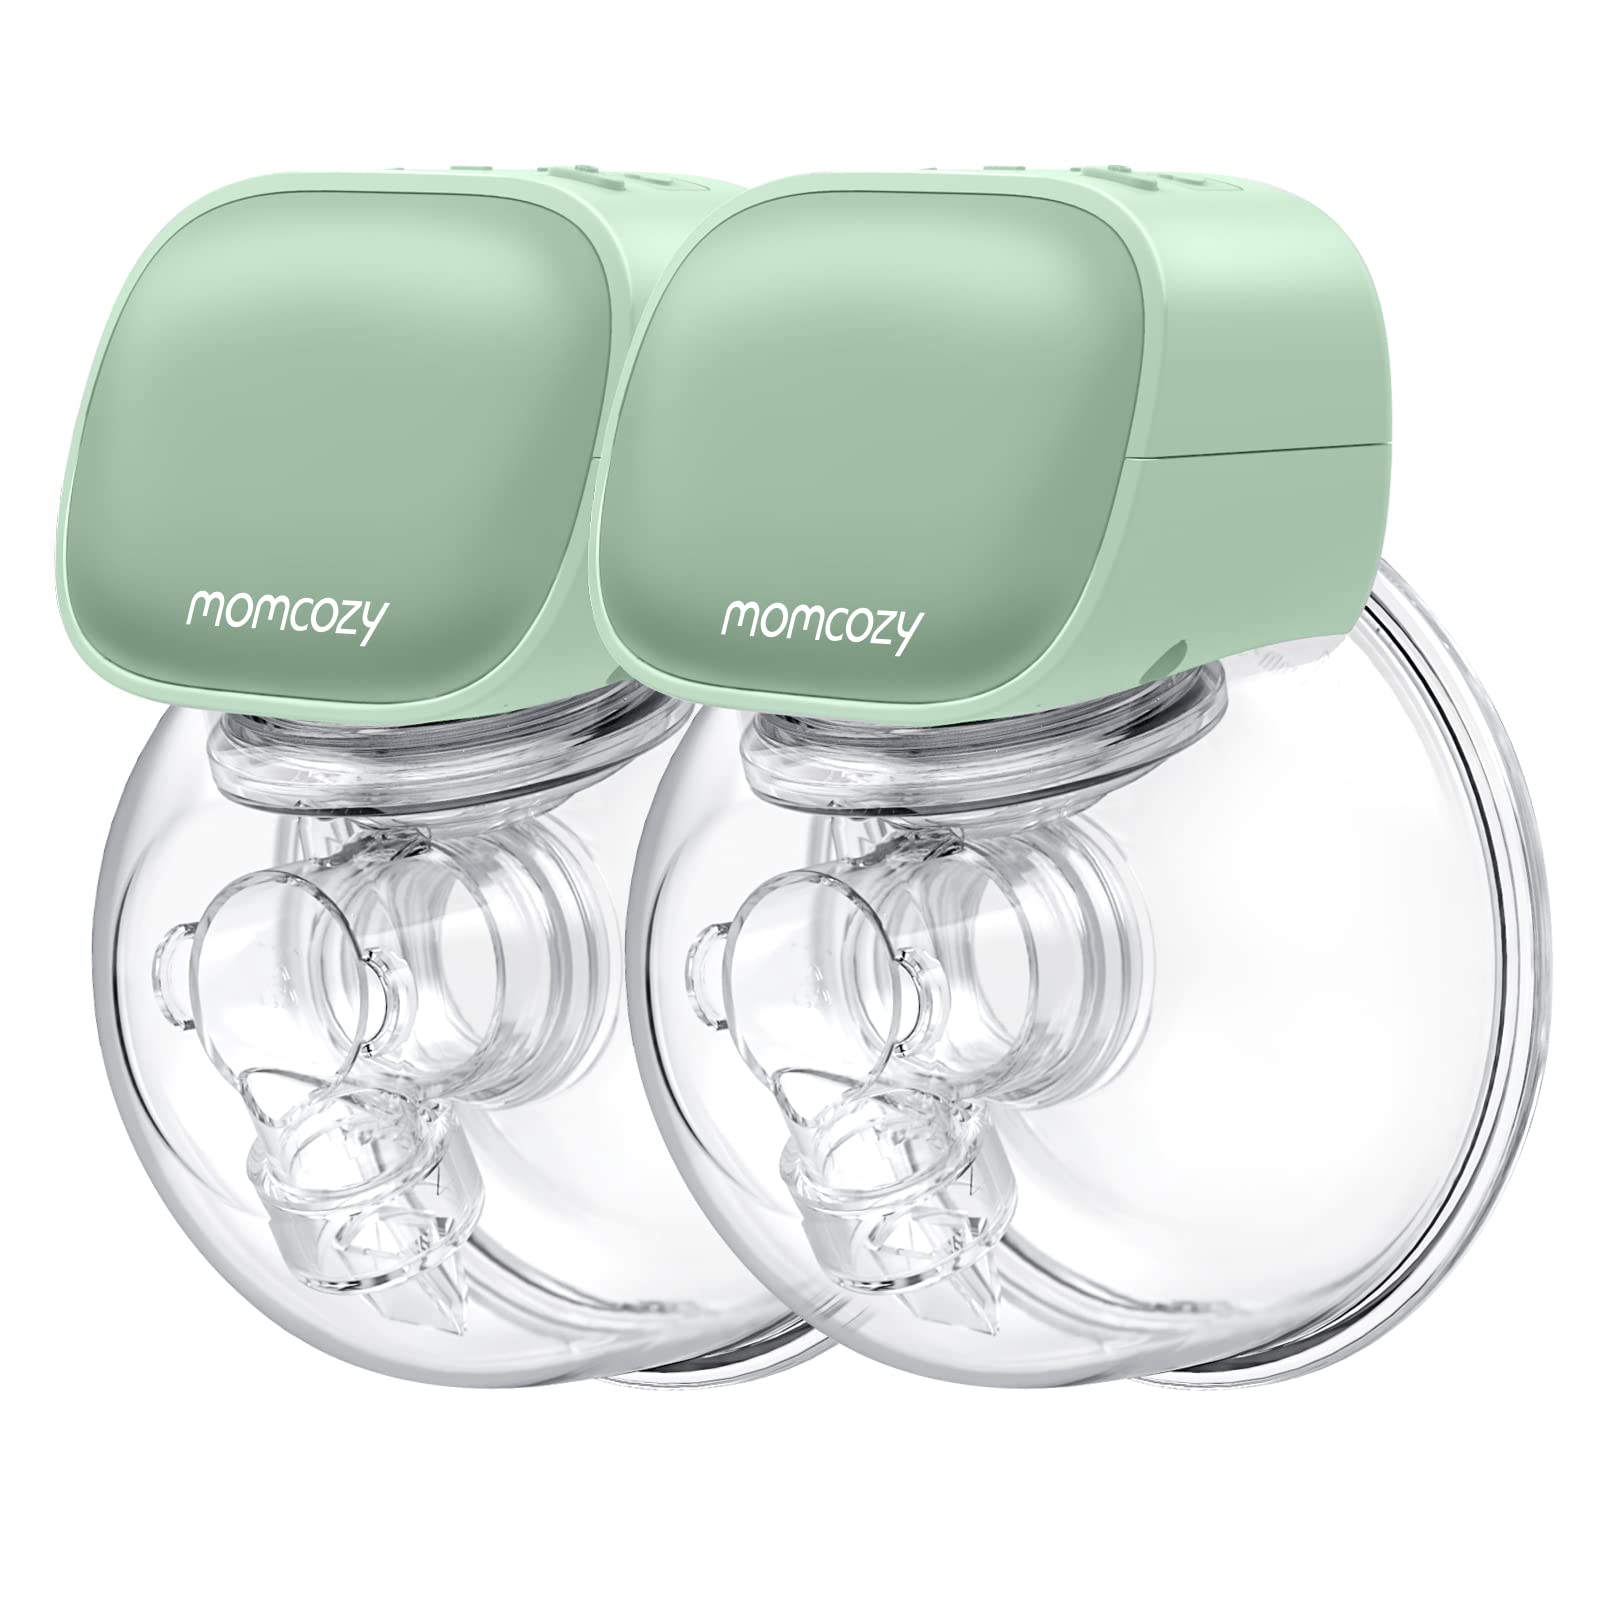 Momcozy Wearable Breast Pump, Double Breast Pumps, Portable 2pcs Electric Breast Pumps with 2 Mode & 5 Levels- 24mm (Green)